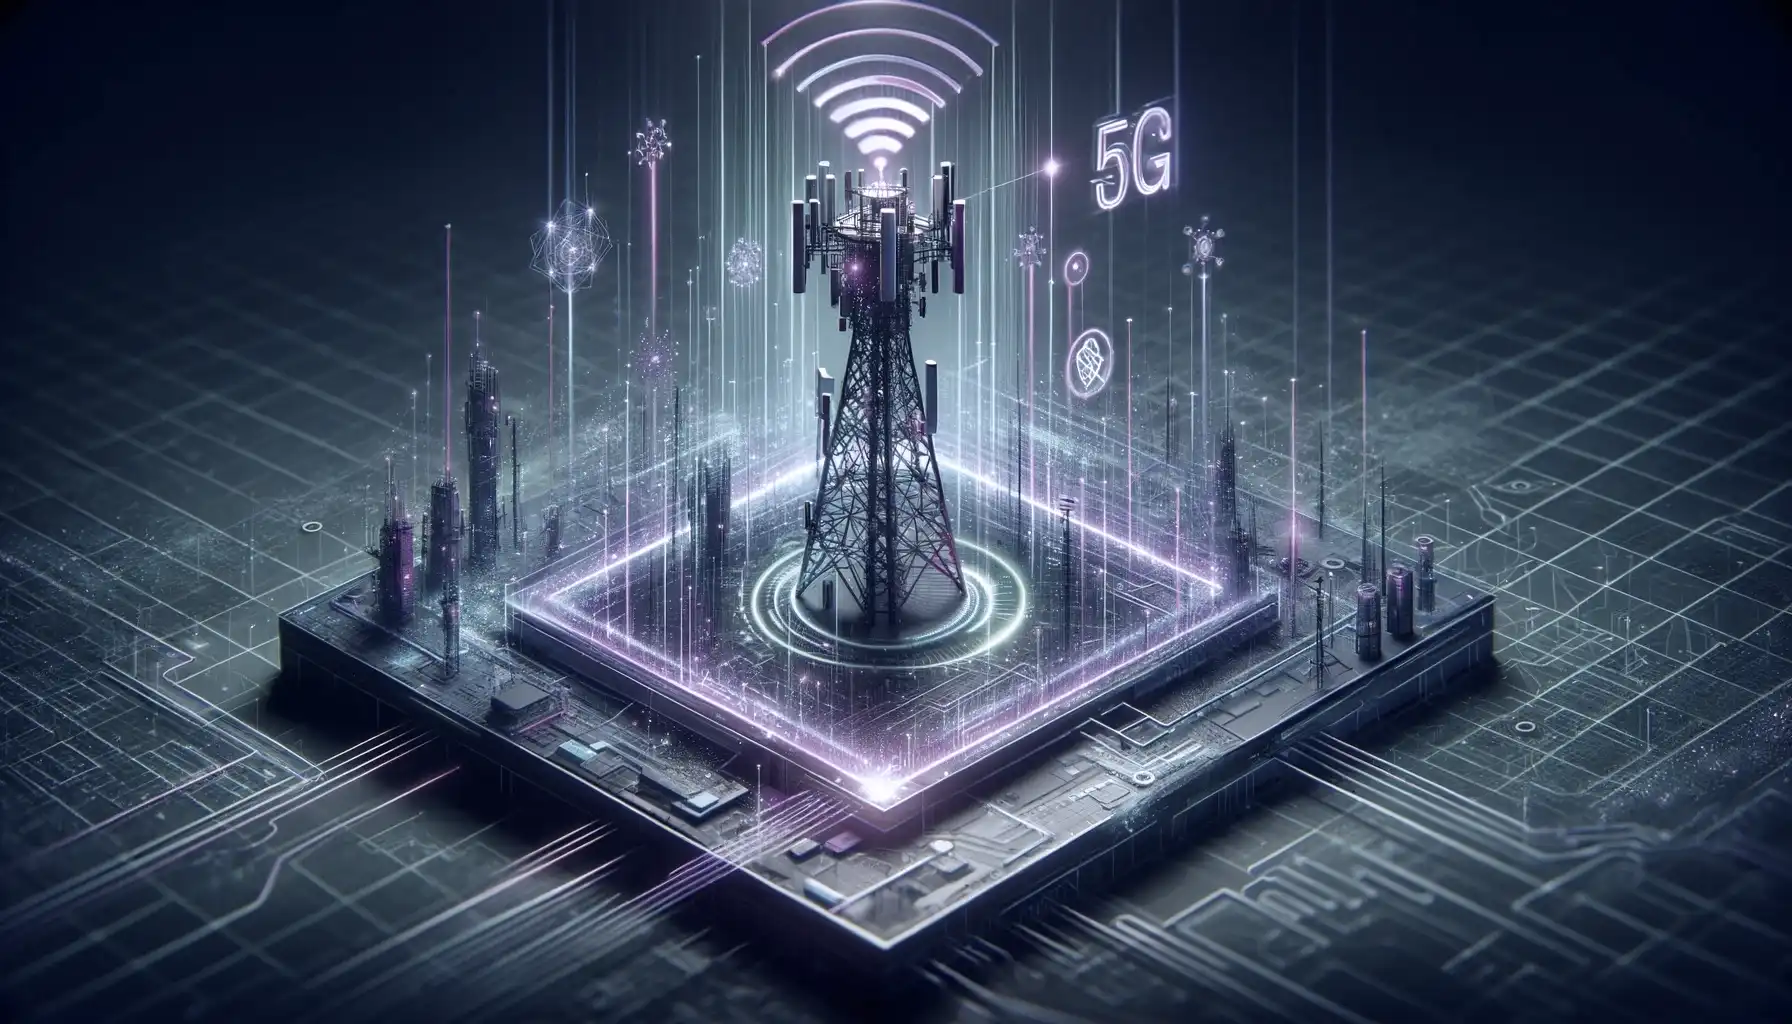 Featured image for “Structure Type Identification System for Infrastructure Planning on a 5G Network”